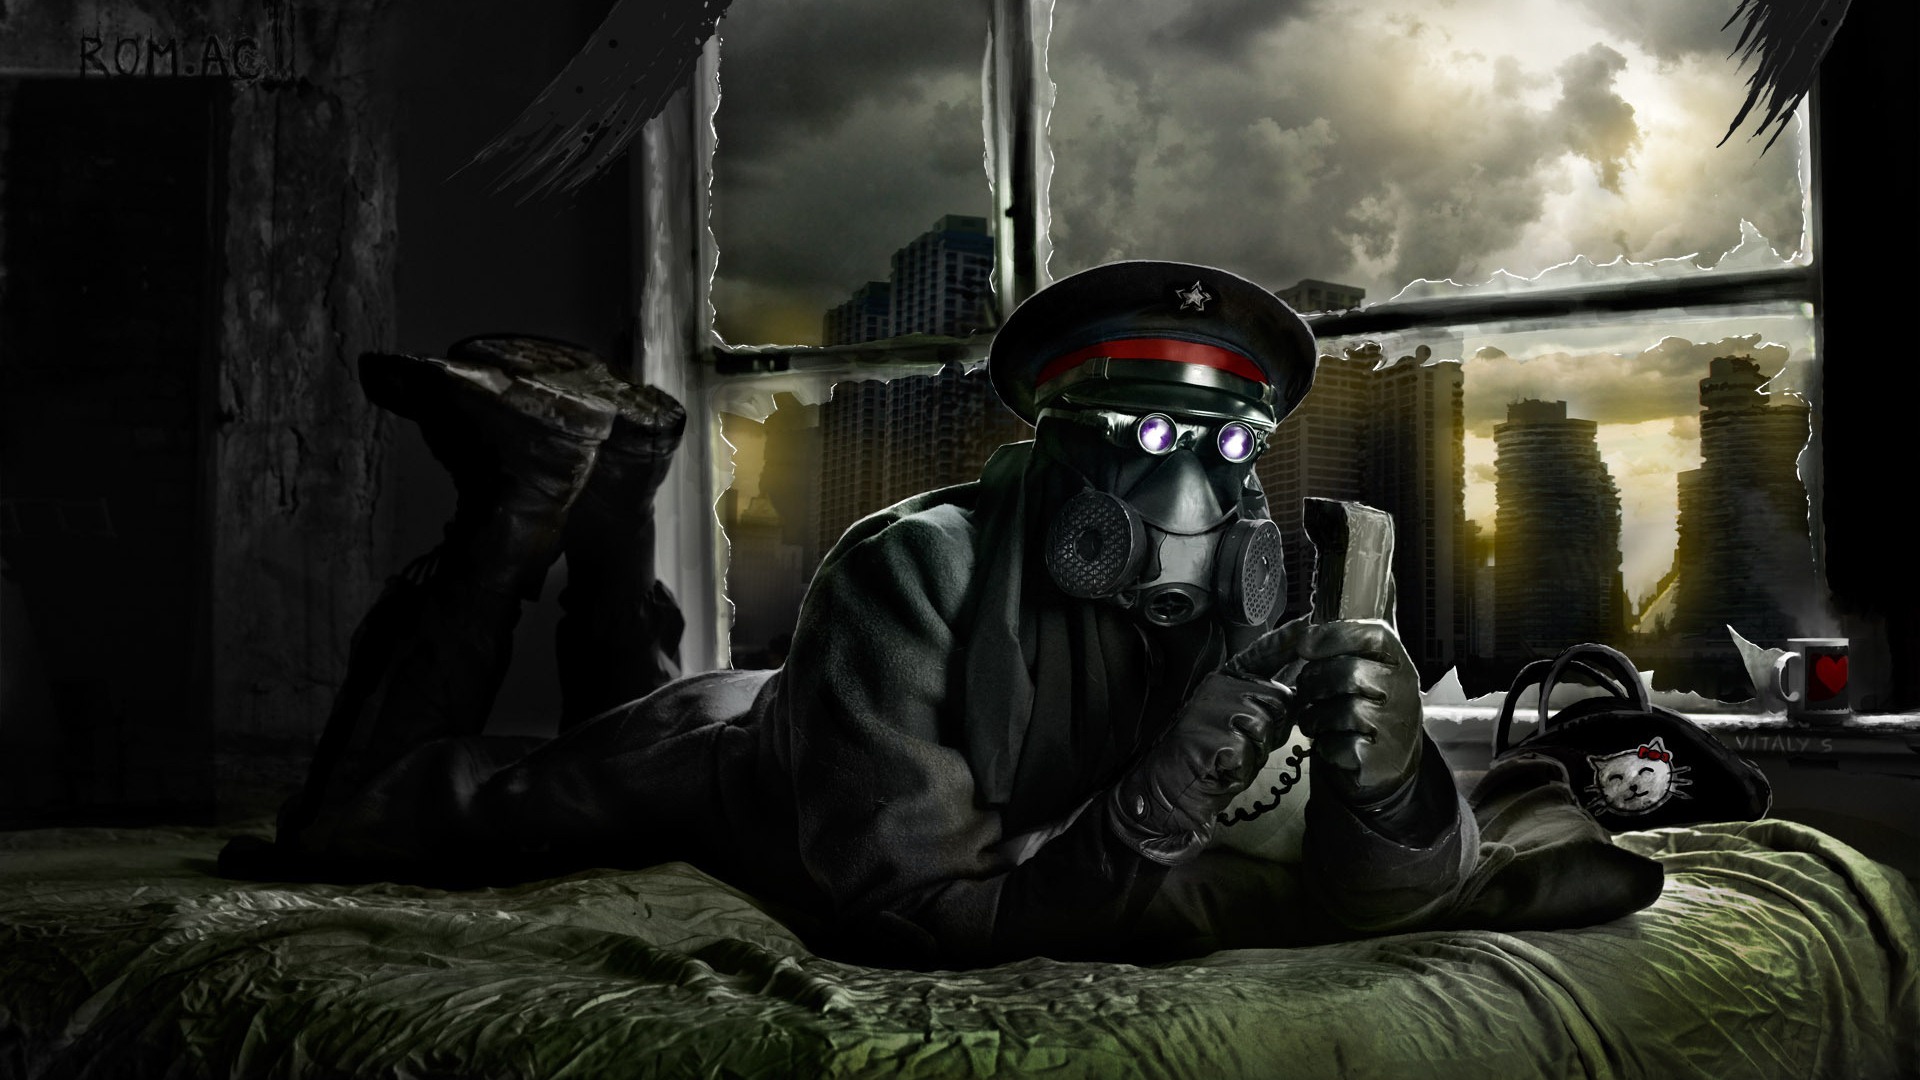 Romantically Apocalyptic creative painting wallpapers (2) #14 - 1920x1080